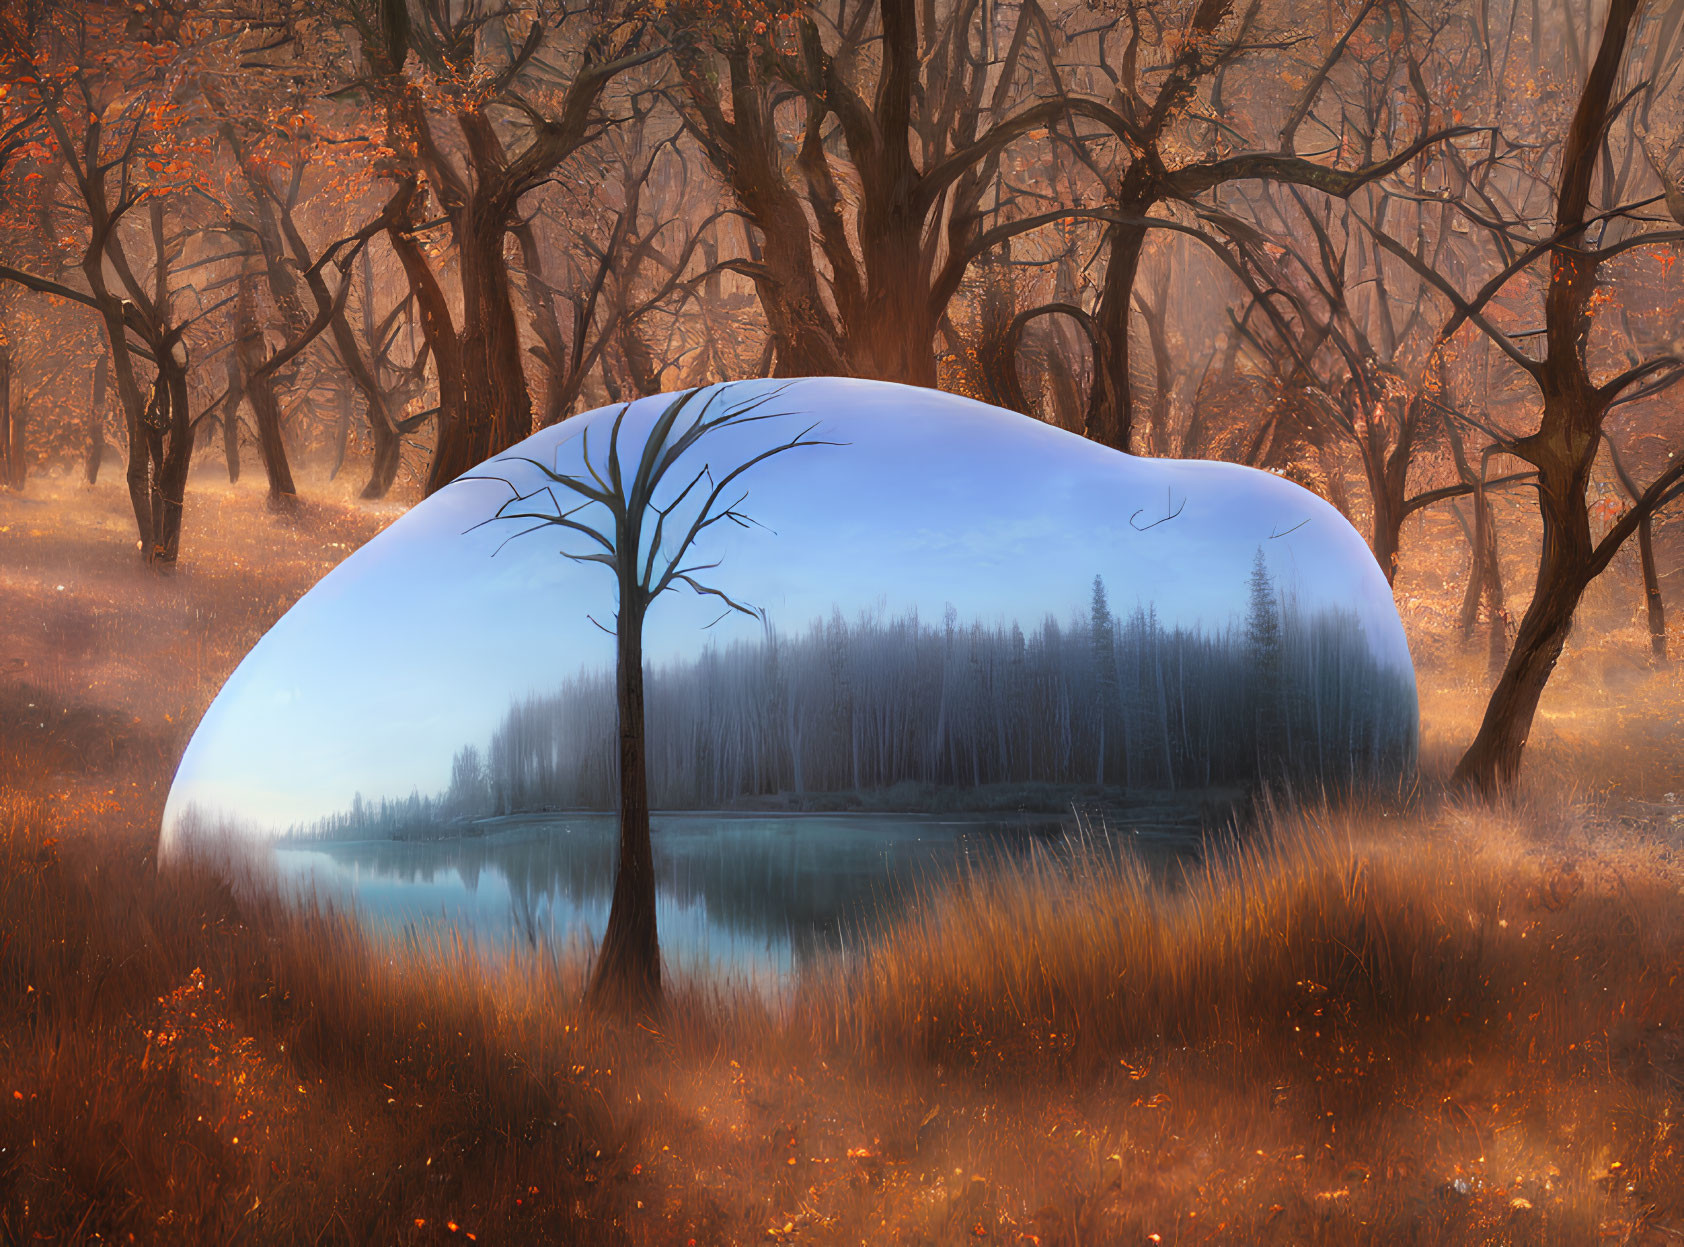 Reflective dome capturing tranquil autumnal forest scene